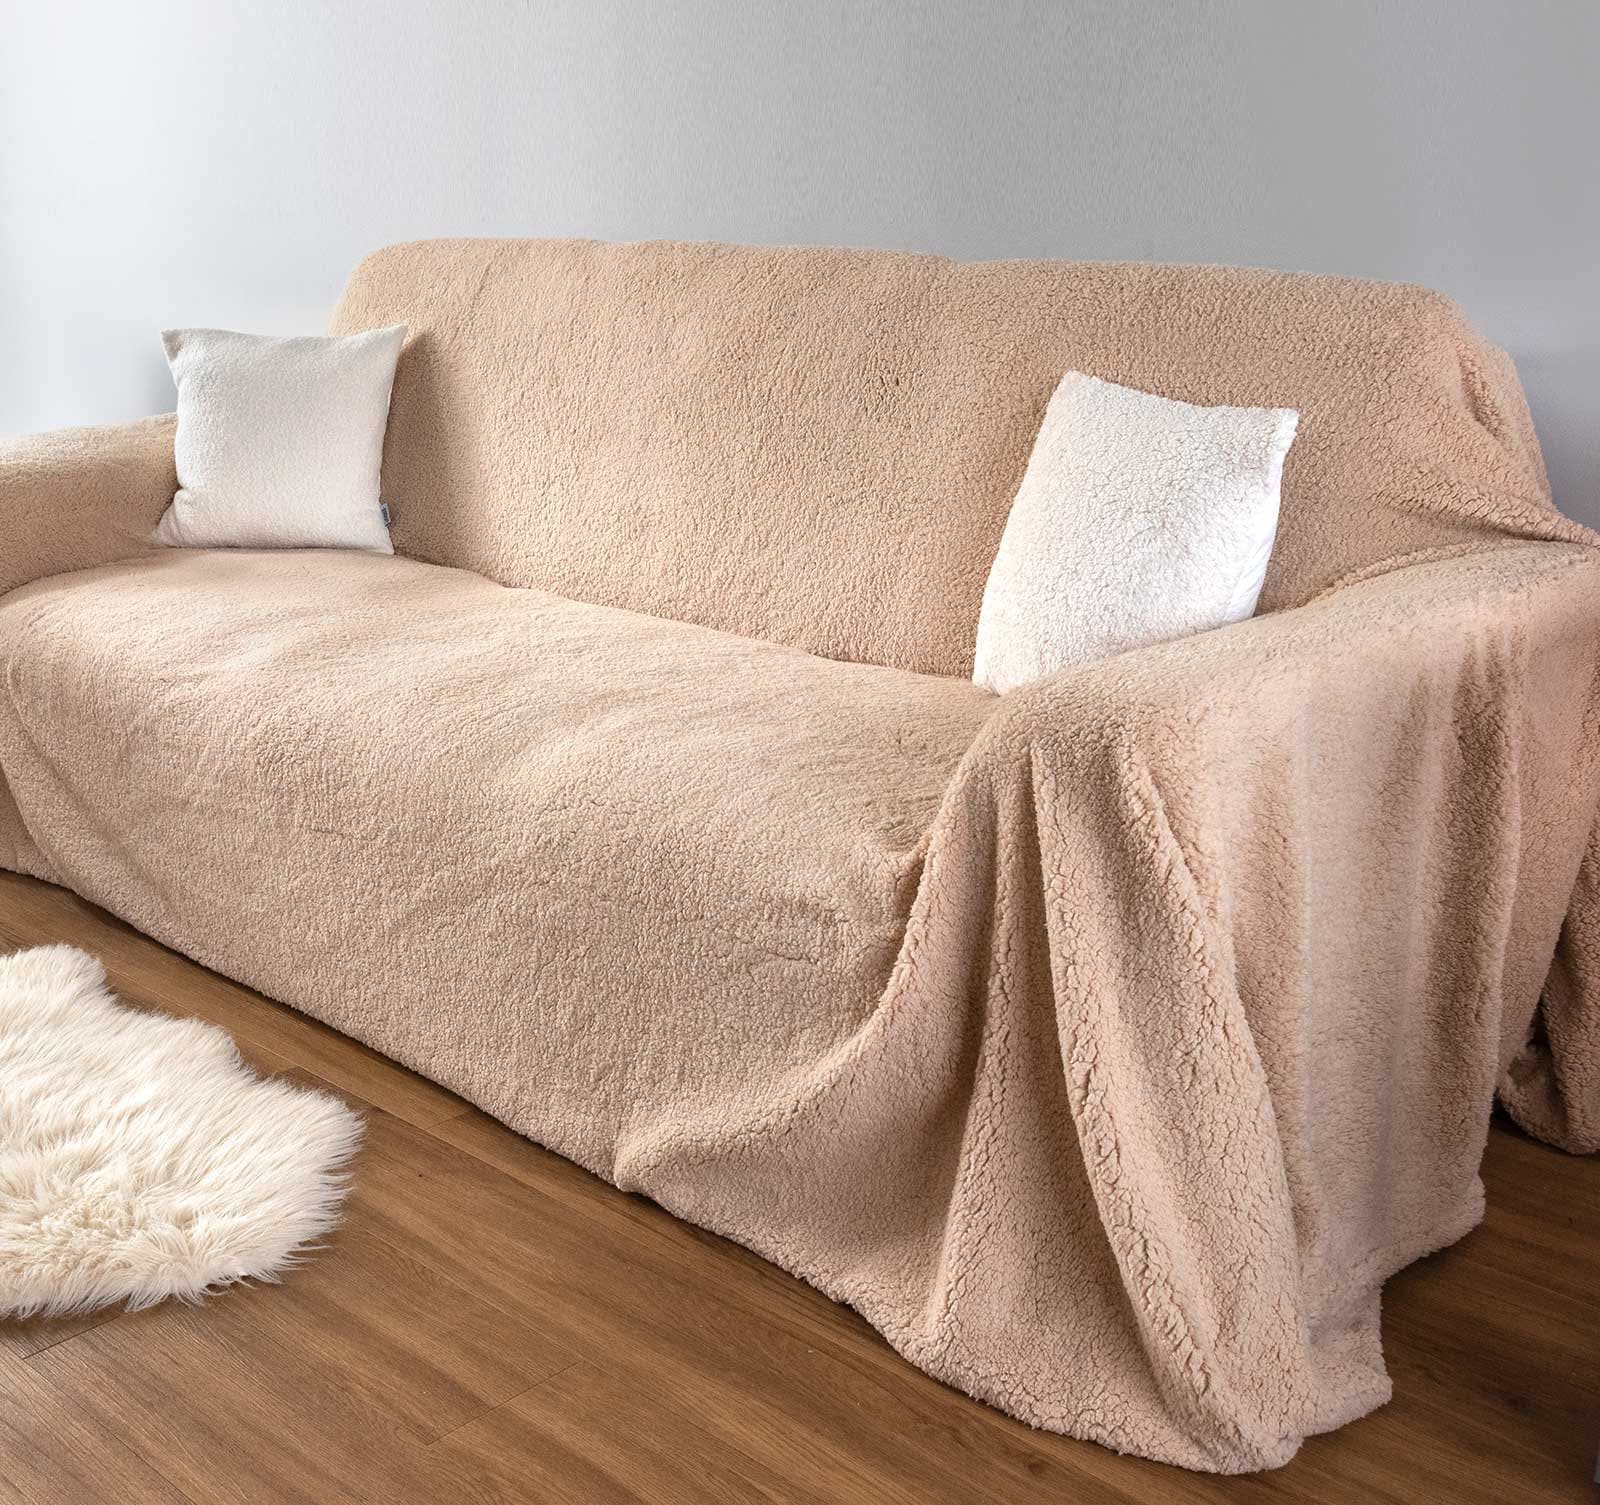 Couch Cover,Soft Warm Faux Fur Sofa Couch Cover, Plush Shaggy Sectional  Couch Covers, Non-Slip Sofa Slipcover for Dogs Cats Pet Love Seat Recliner